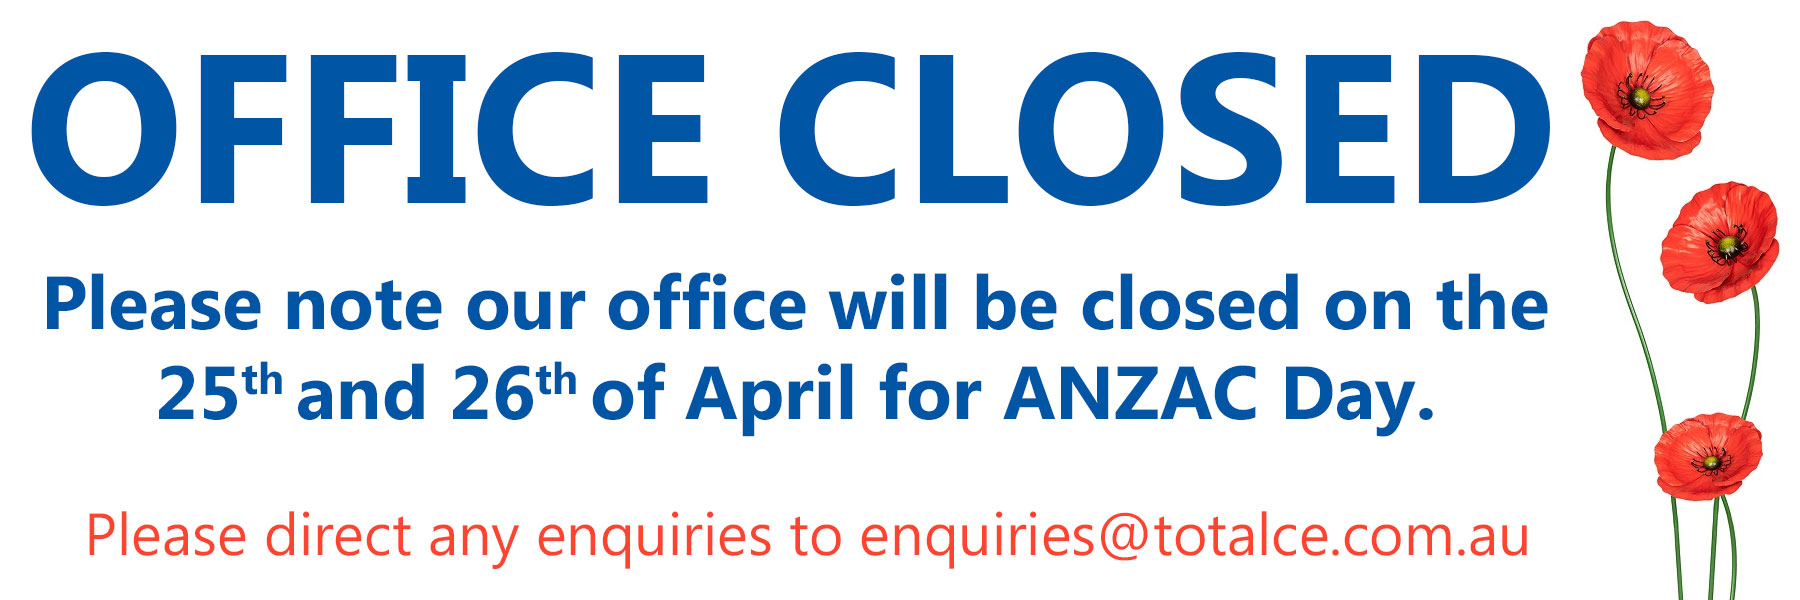 office-closed-anzac-day